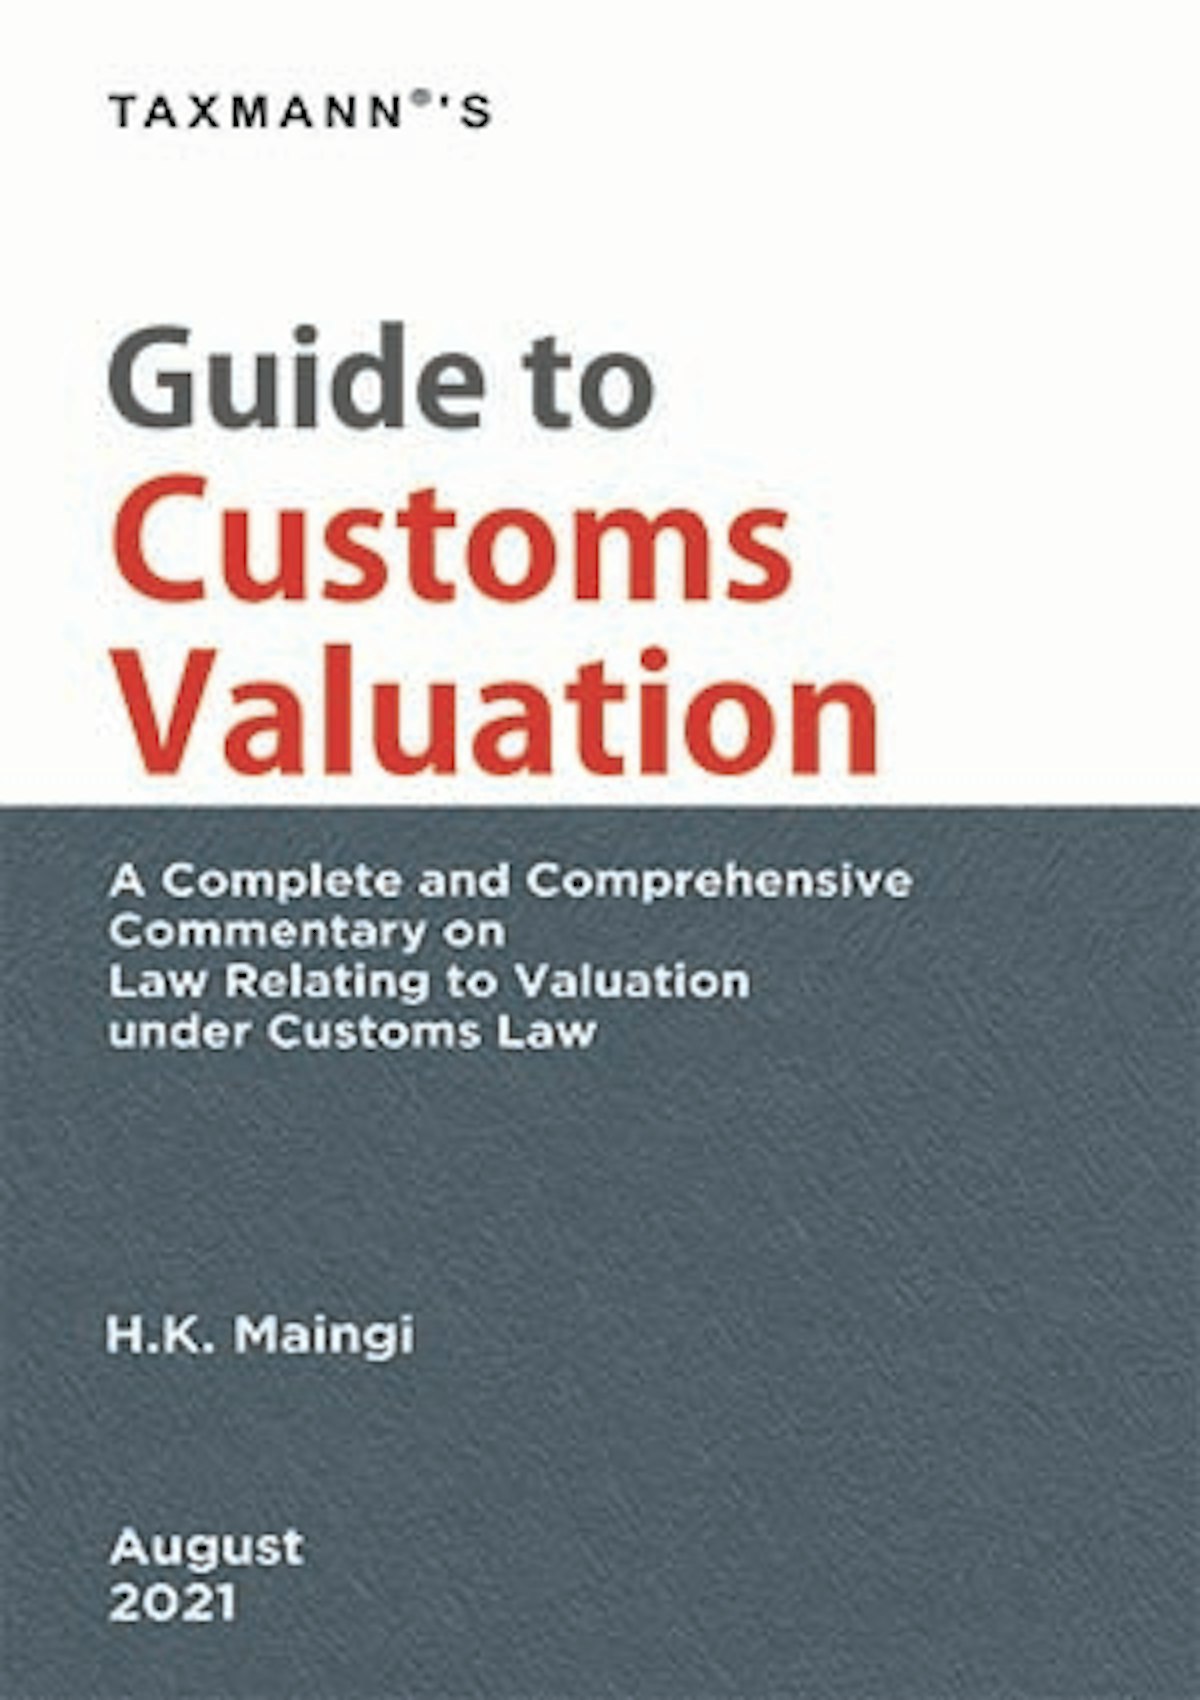 guide-to-customs-valuation-by-h-k-maingi-taxmann-books